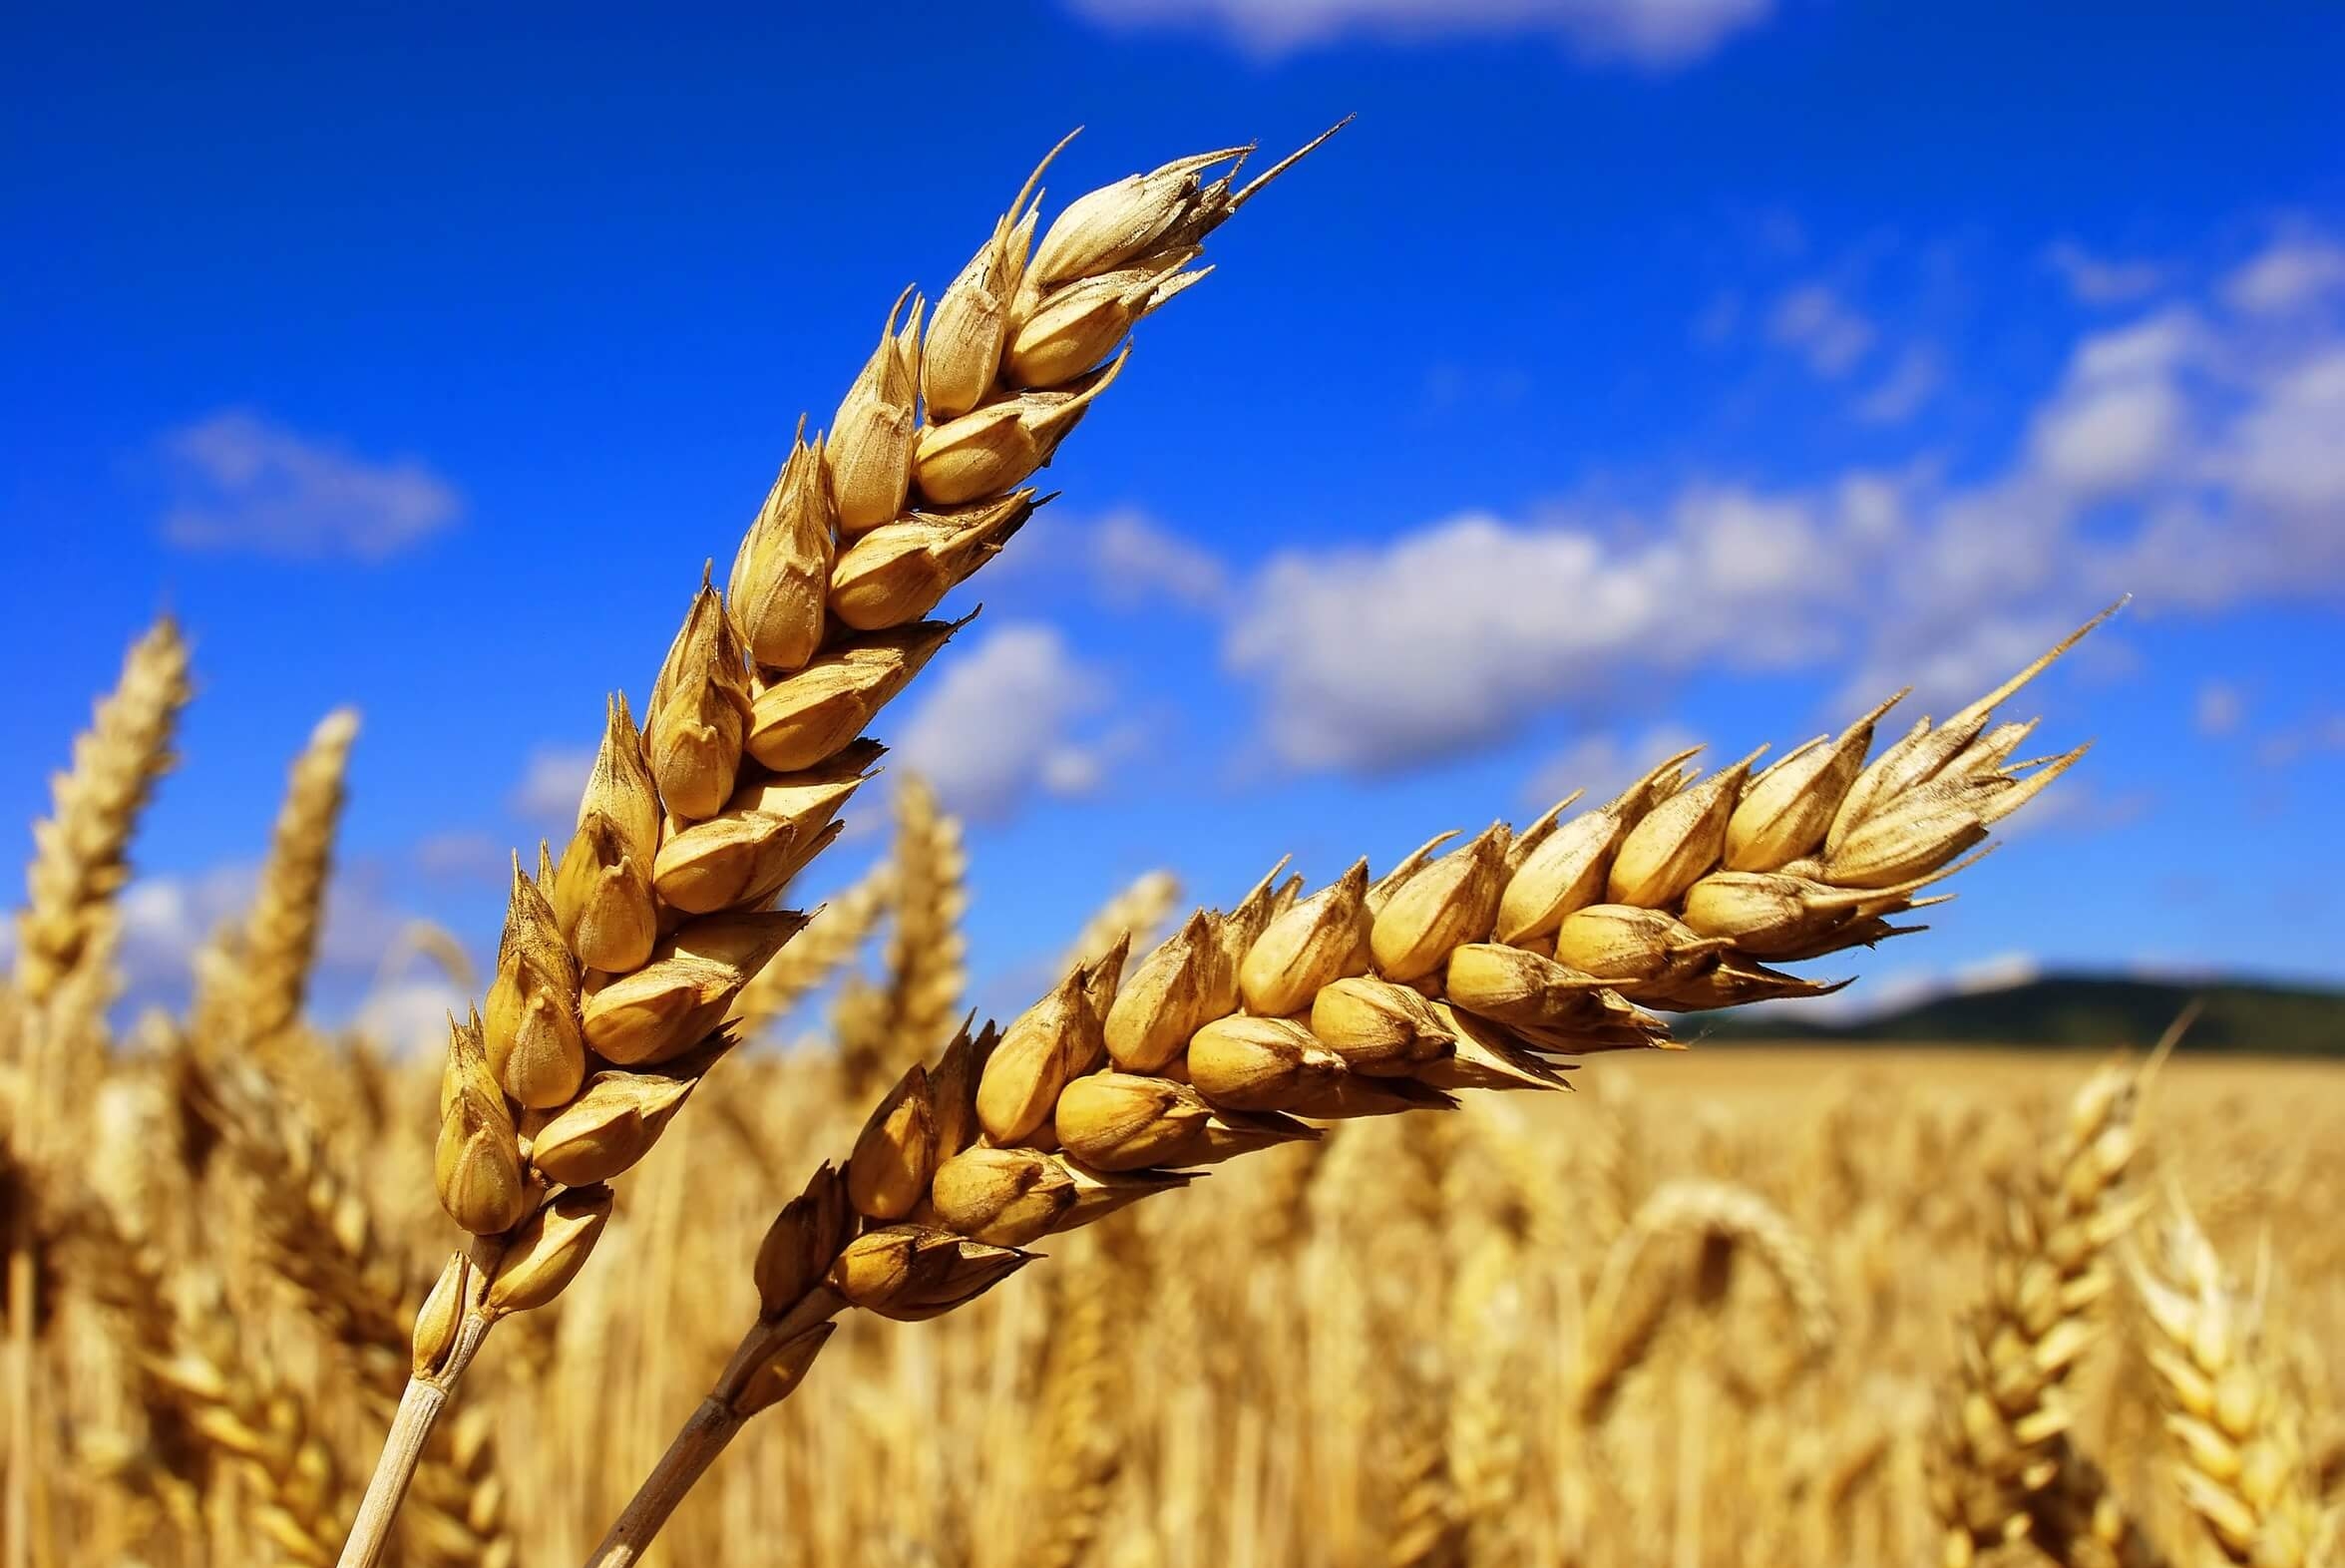 Delayed exports from Russia supports the price of wheat